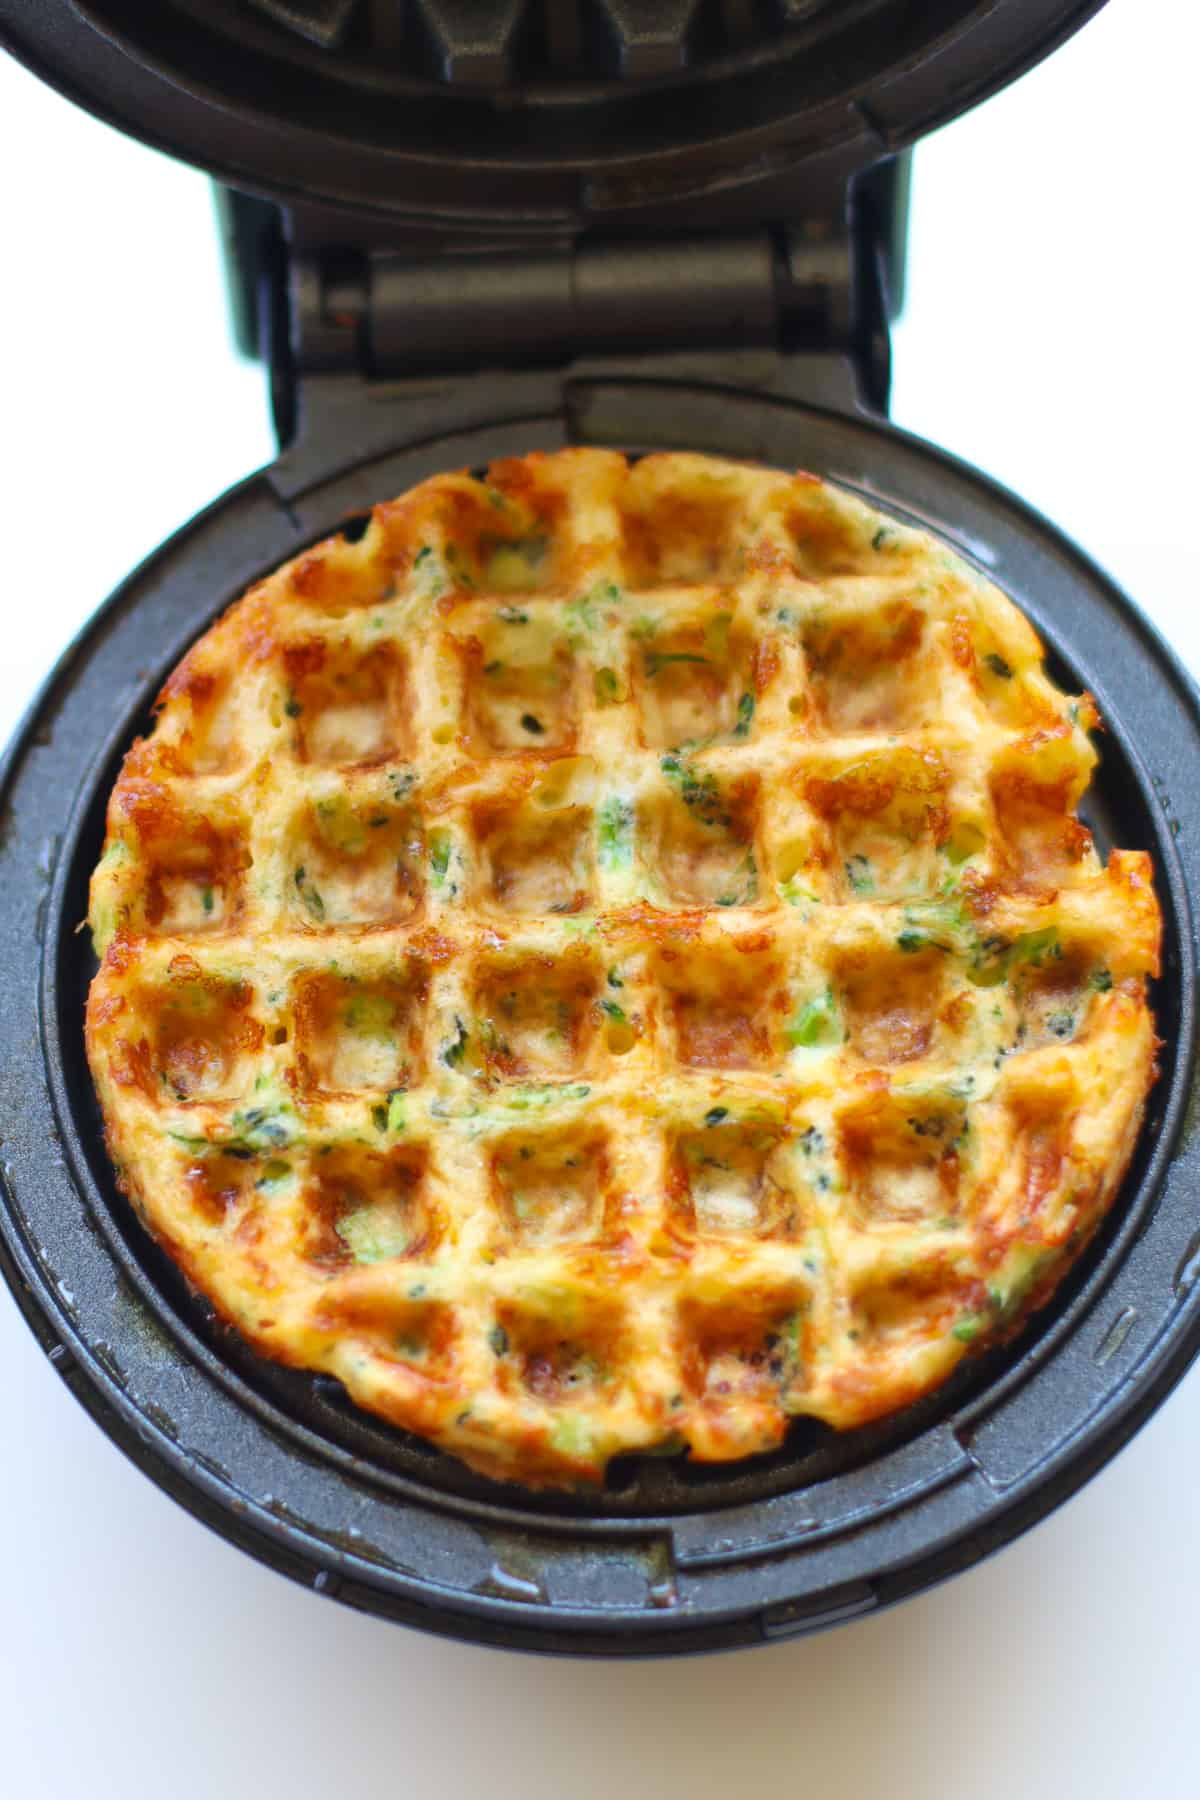 Cooked waffle in an open waffle maker.